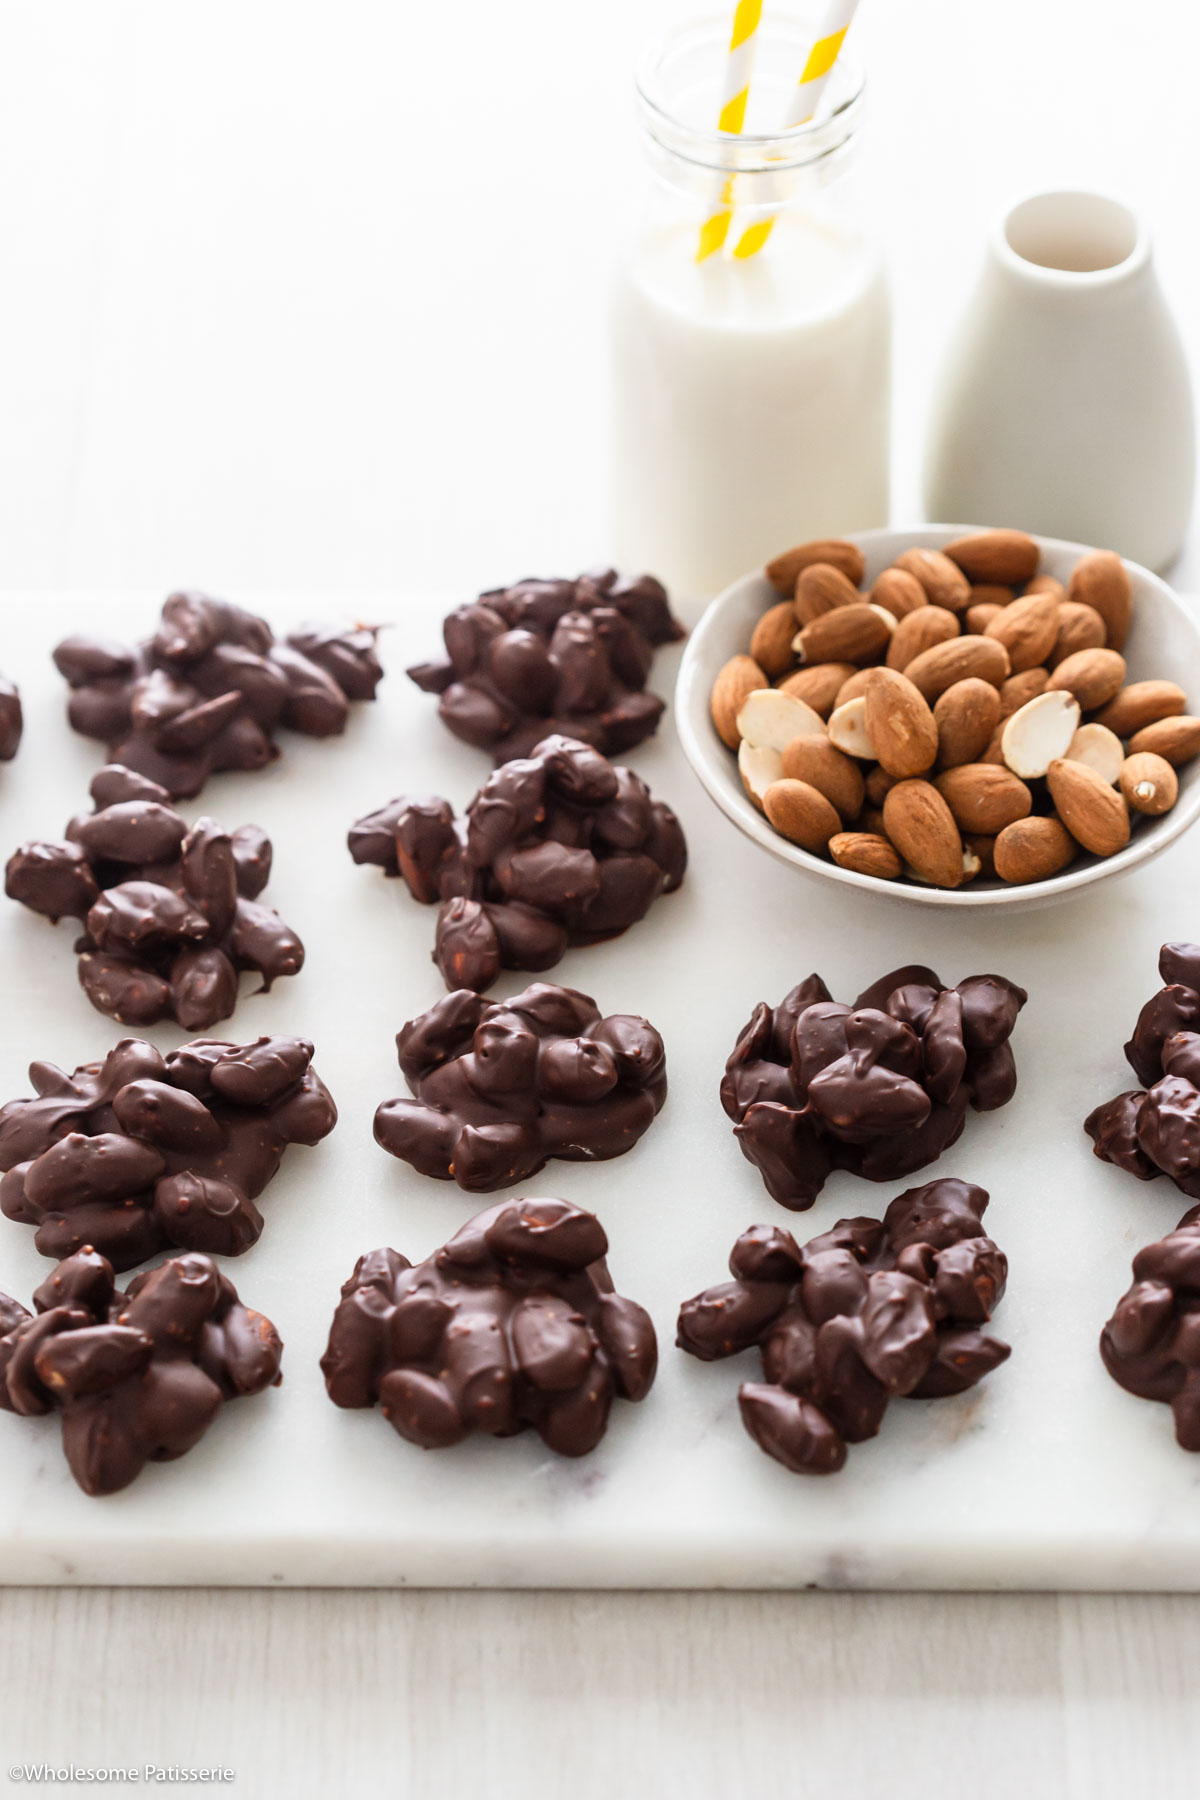 Chocolate covered almonds sitting on white marble platter next to bowl of whole almonds and glass of milk